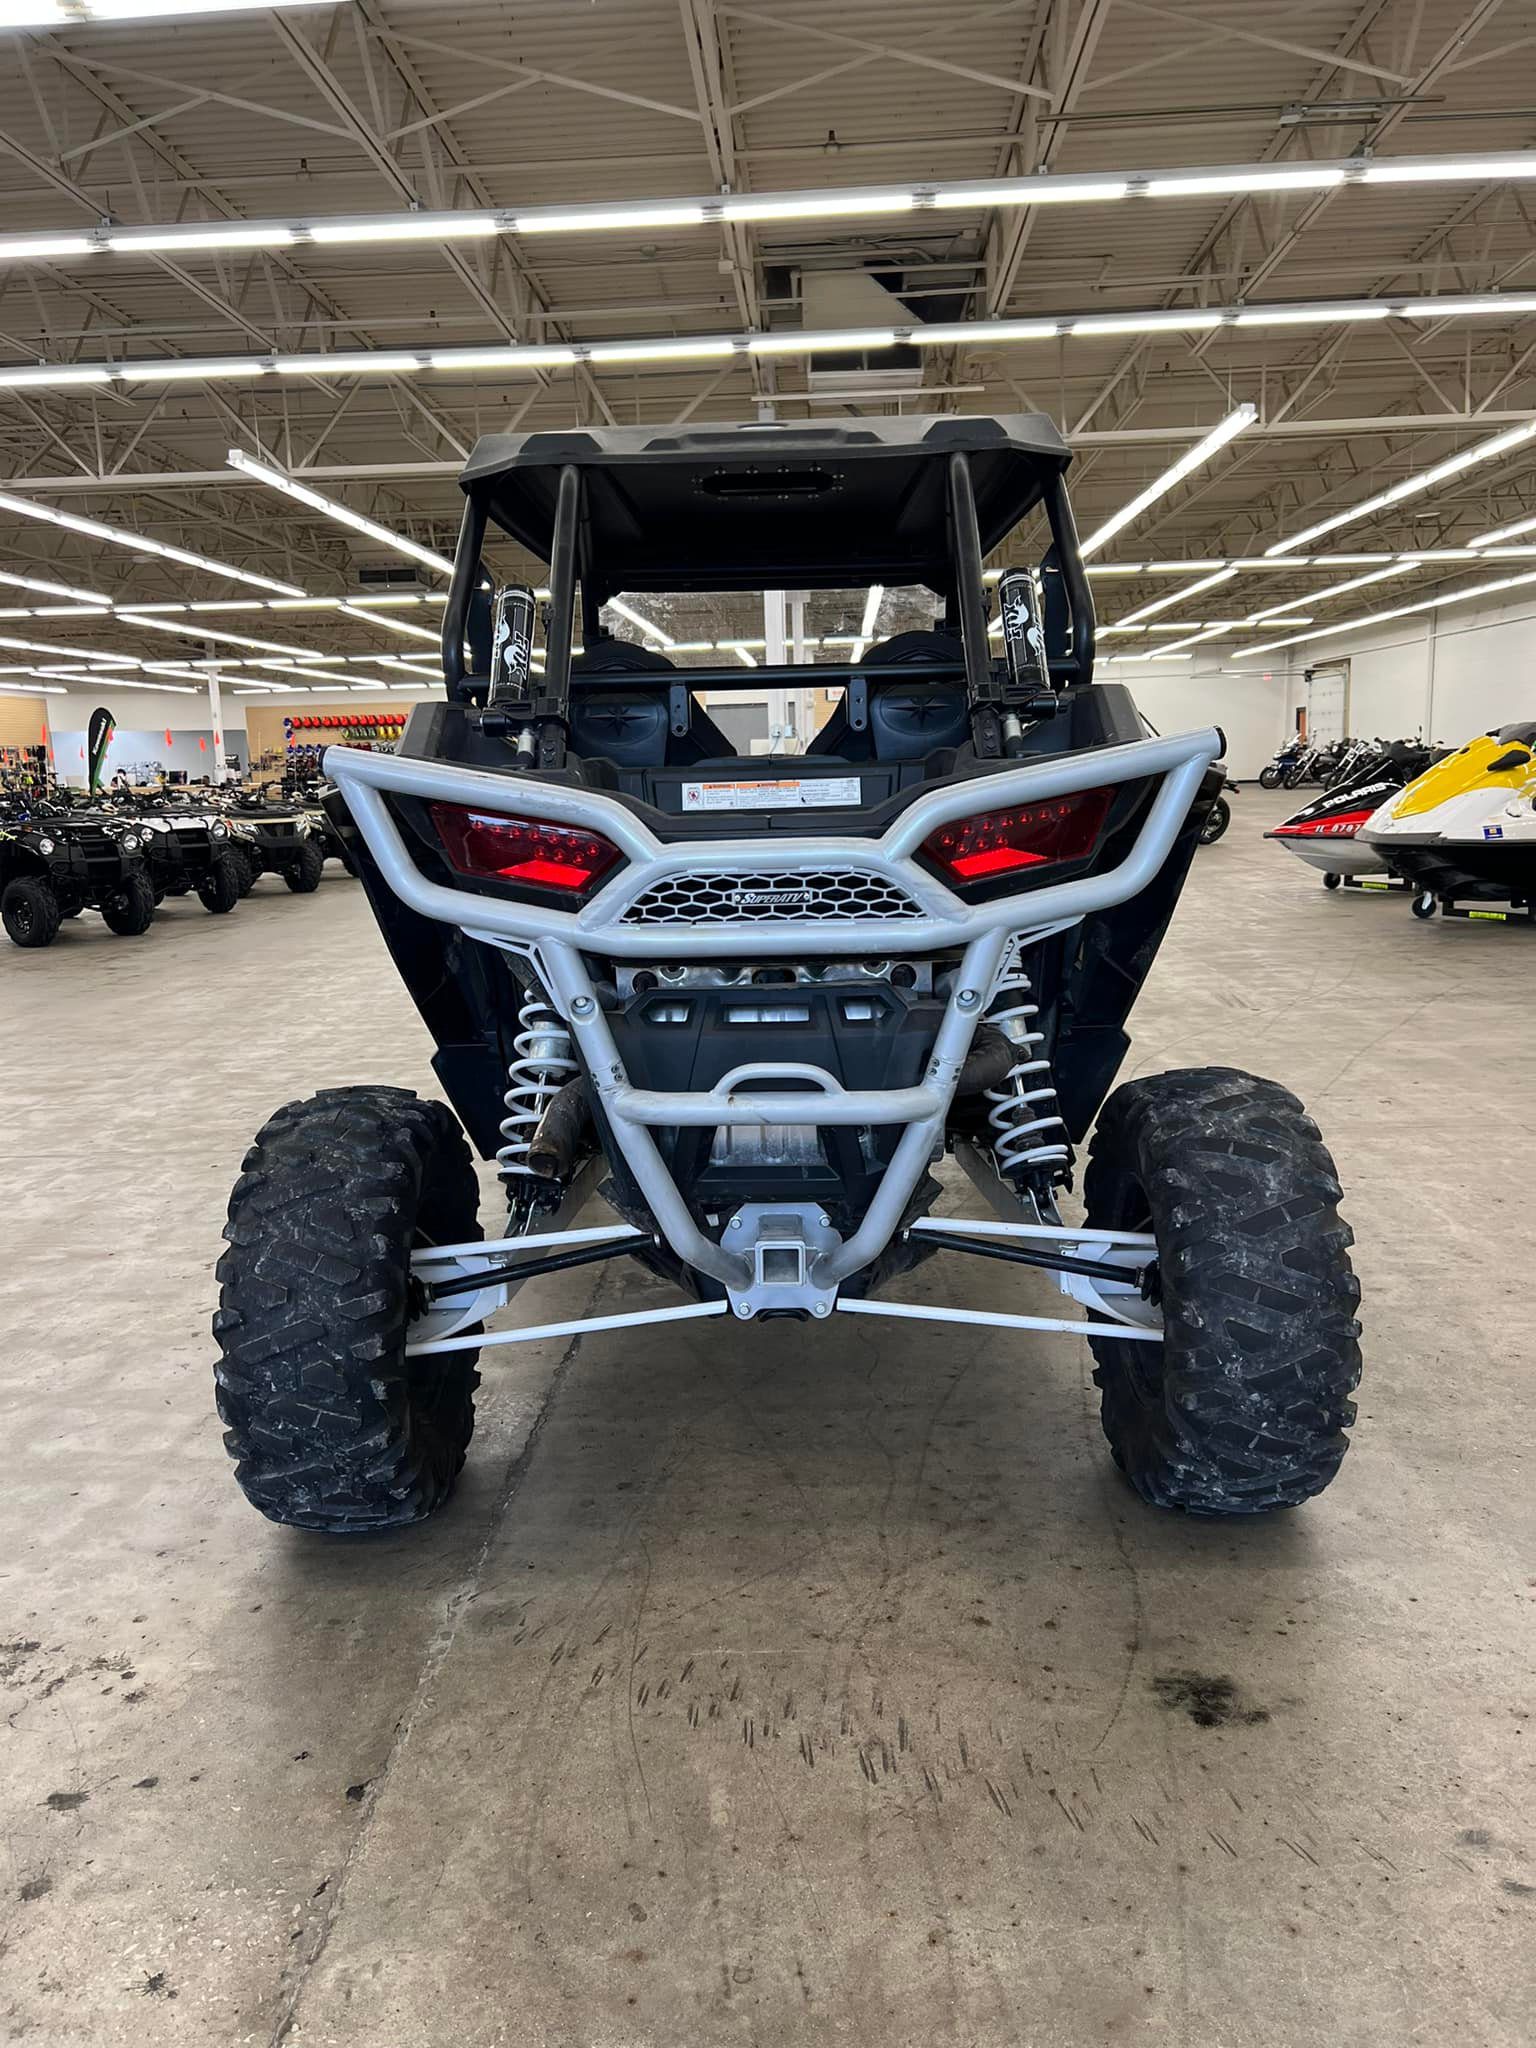 oasis-powersports-black-side-by-side-marion-illinois